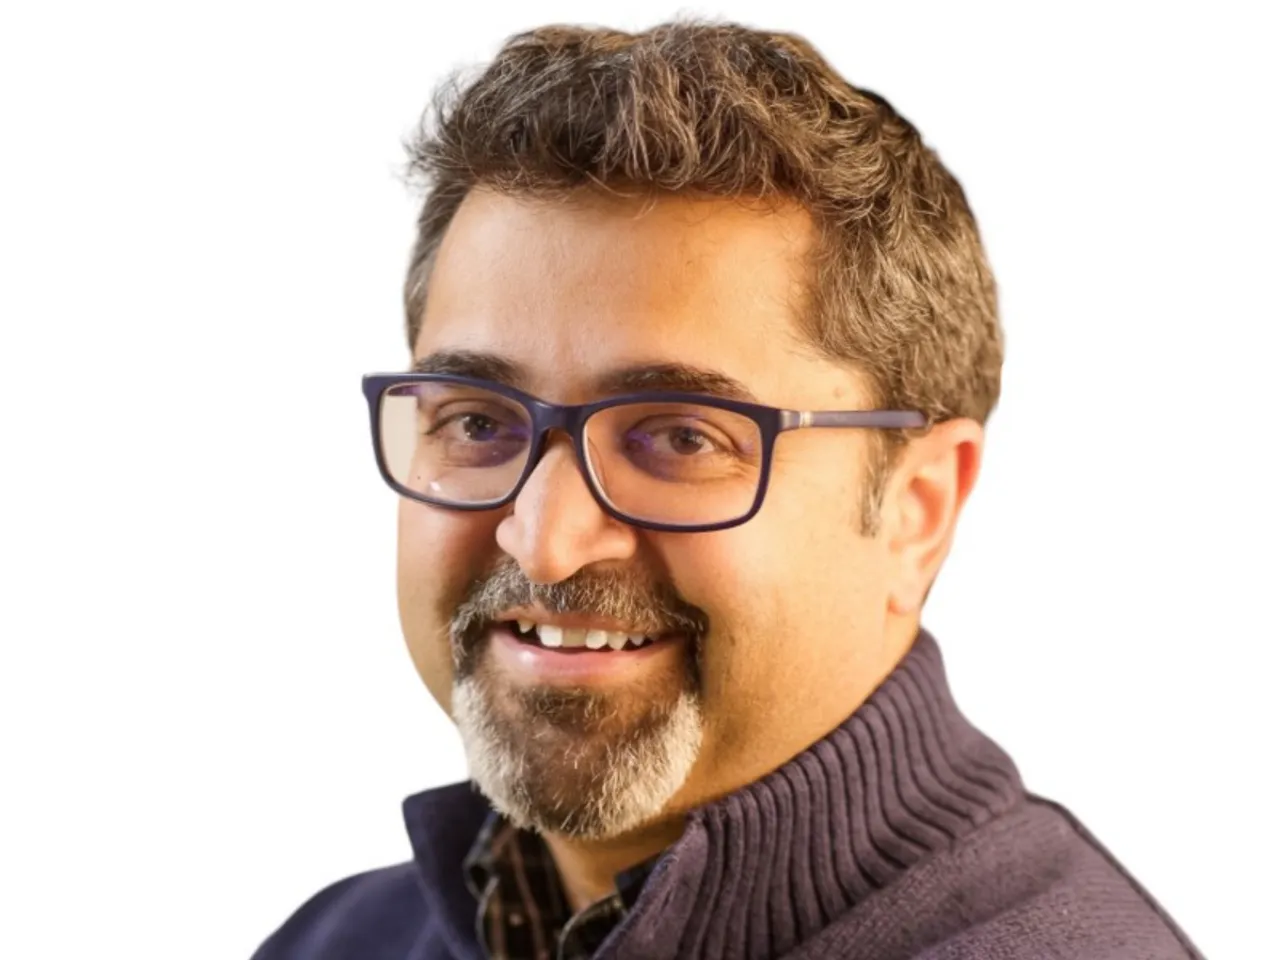 Rohit Batra, general manager and vice president for telecom, media, and tech at ServiceNow